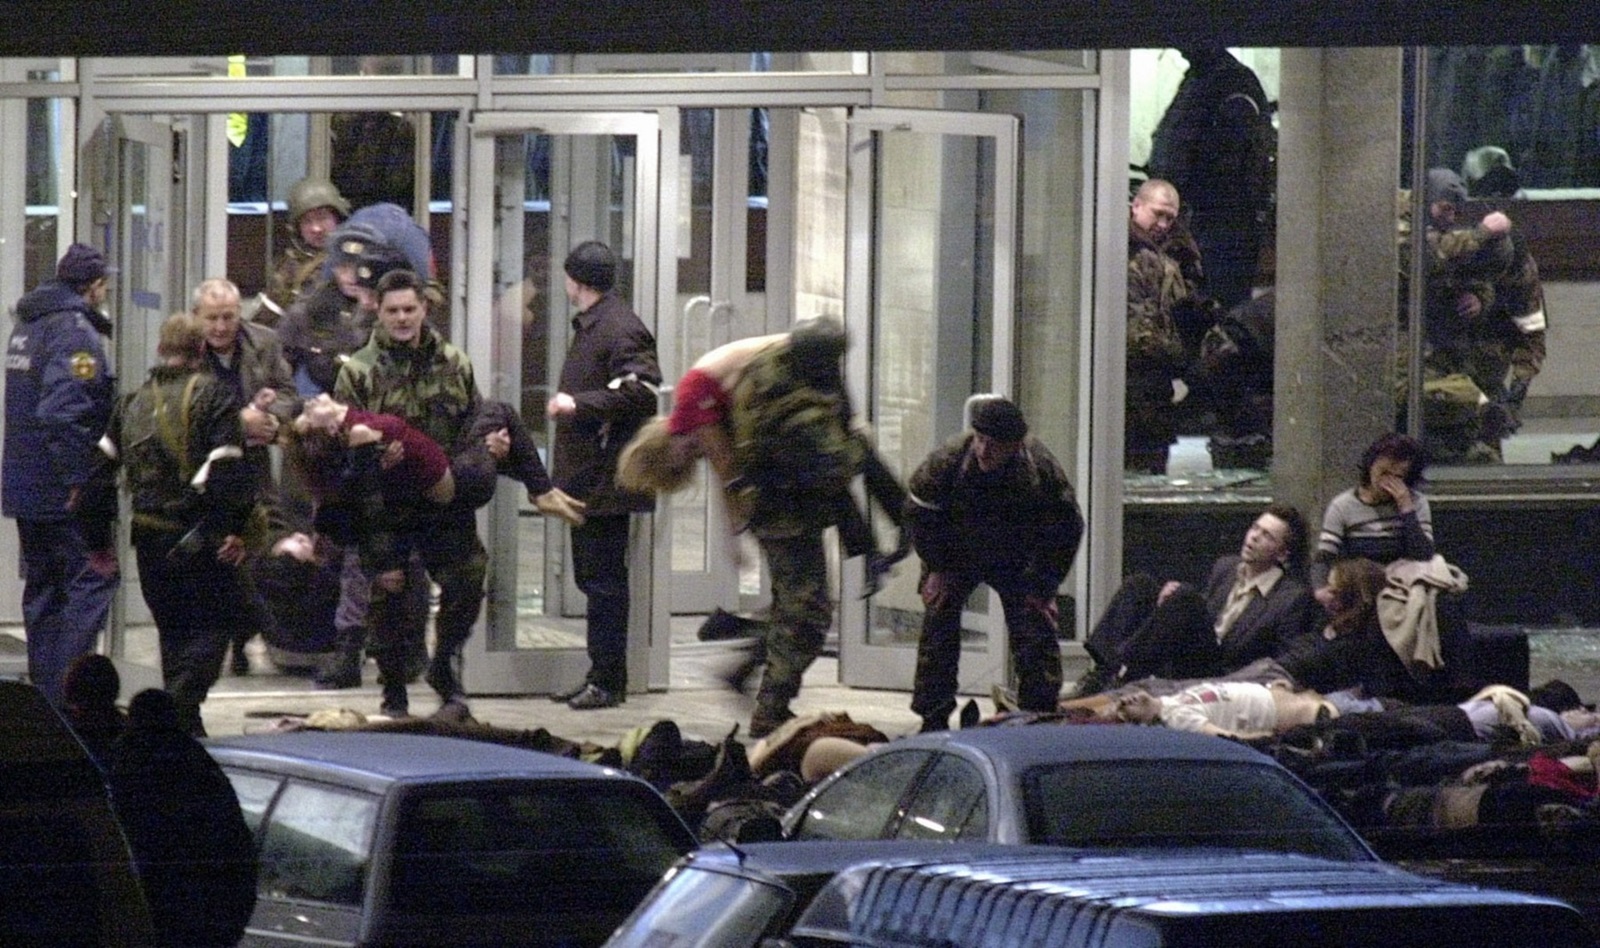 A picture taken 26 October 2002 shows special forces soldiers evacuating some of the hostages during the storming of the Dubrovka theater building in Moscow captured by Chechen terrorists, after the three-day stand off which left 117 hostages and 50 Chechen militants dead, almost all of them gassed by Russian forces in controversial army assault. More than 750 hostages were saved.  AFP PHOTO ITAR-TASS/JAPAN OUT,Image: 23031129, License: Rights-managed, Restrictions: Japan OUT, Model Release: no, Credit line: ANTON DENISOV / AFP / Profimedia